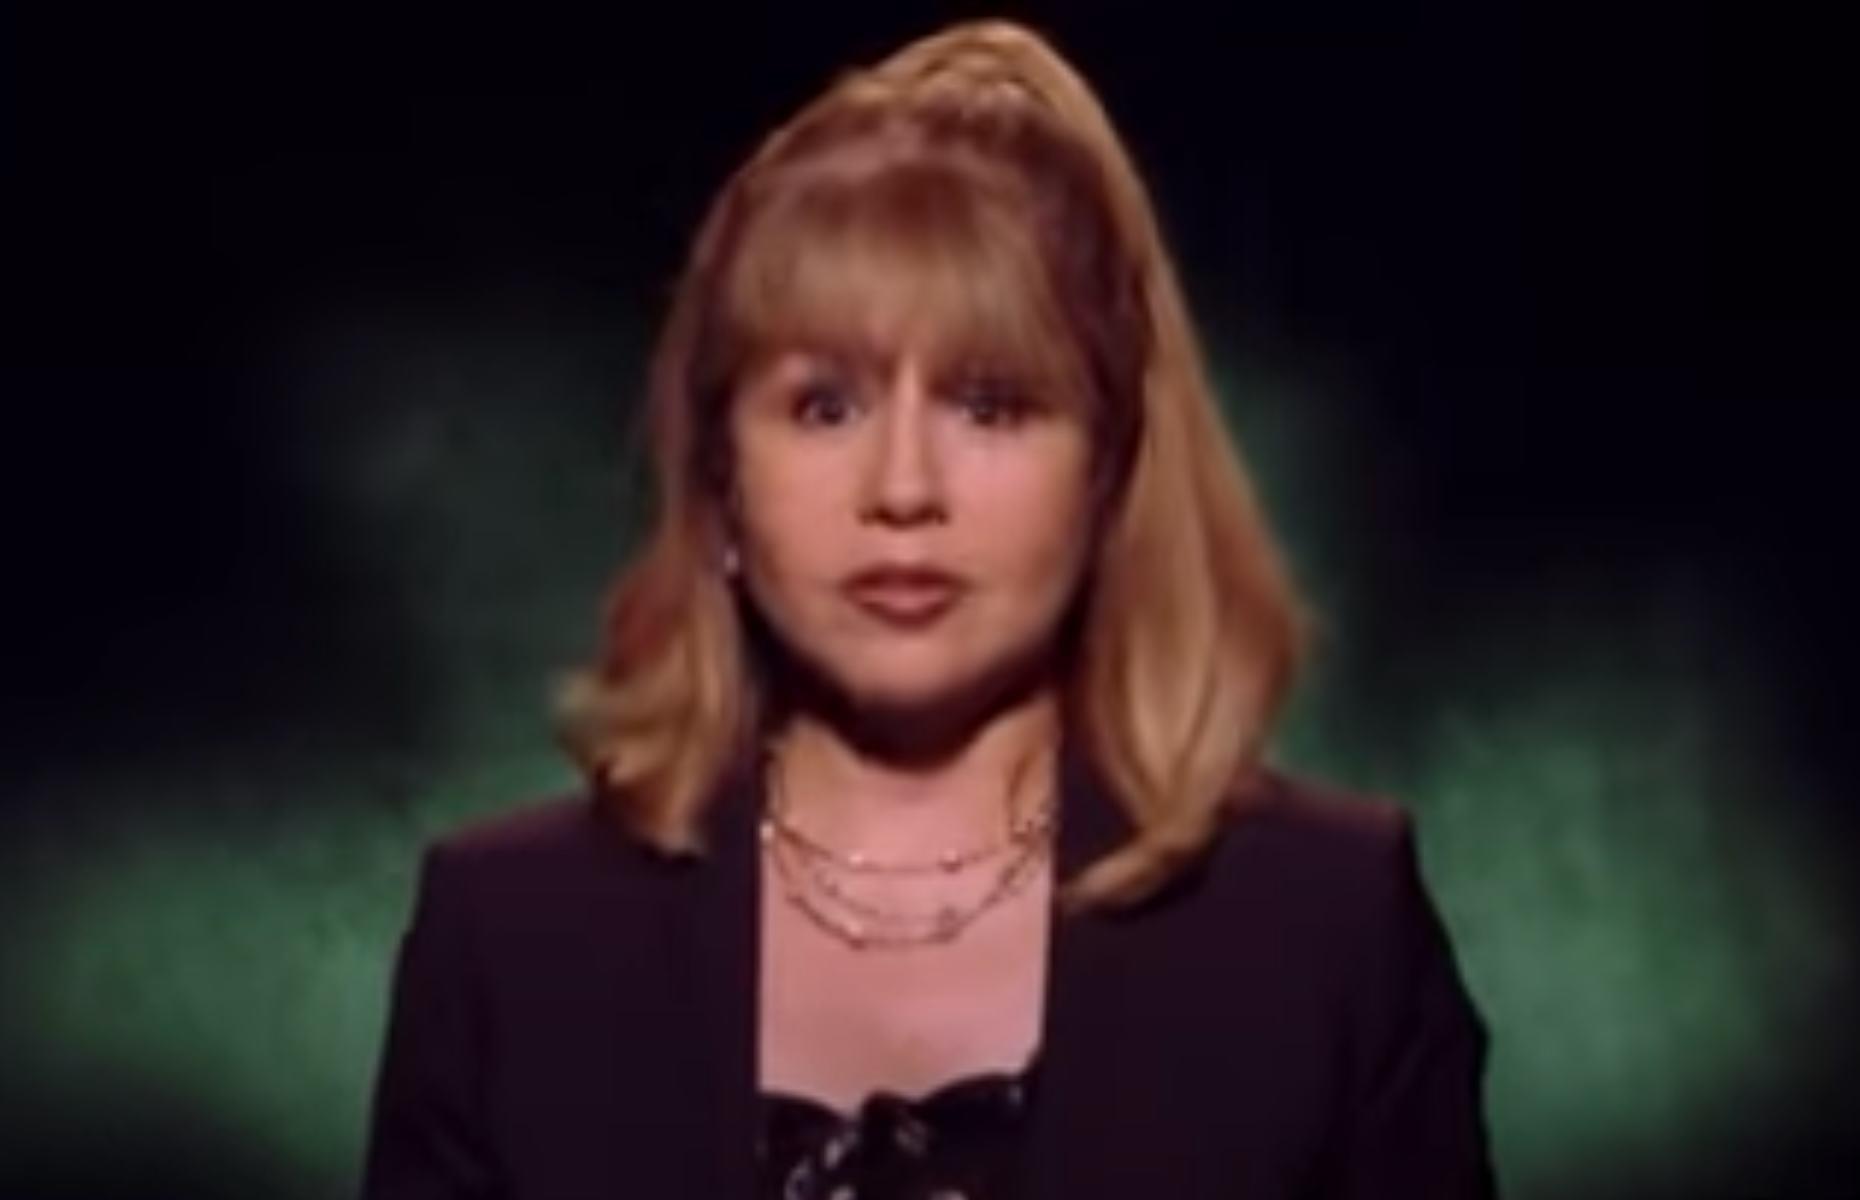 Pia Zadora’s ghost stories